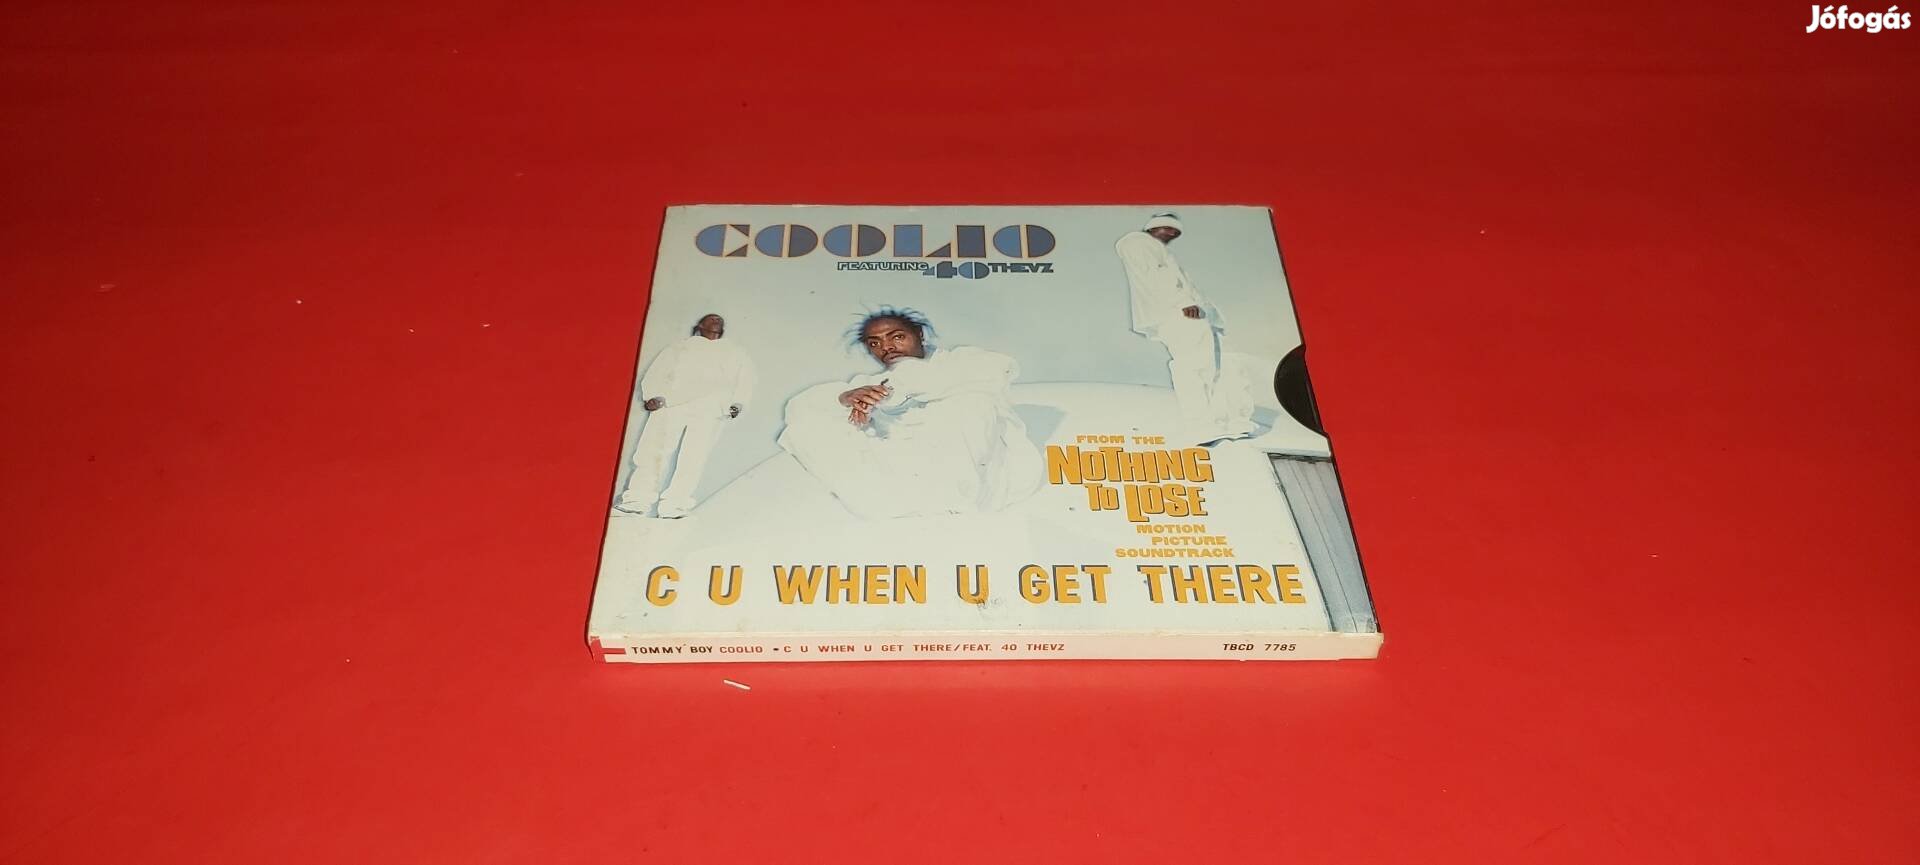 Coolio feat 40 Thevz C U When U Get There maxi Cd 1997